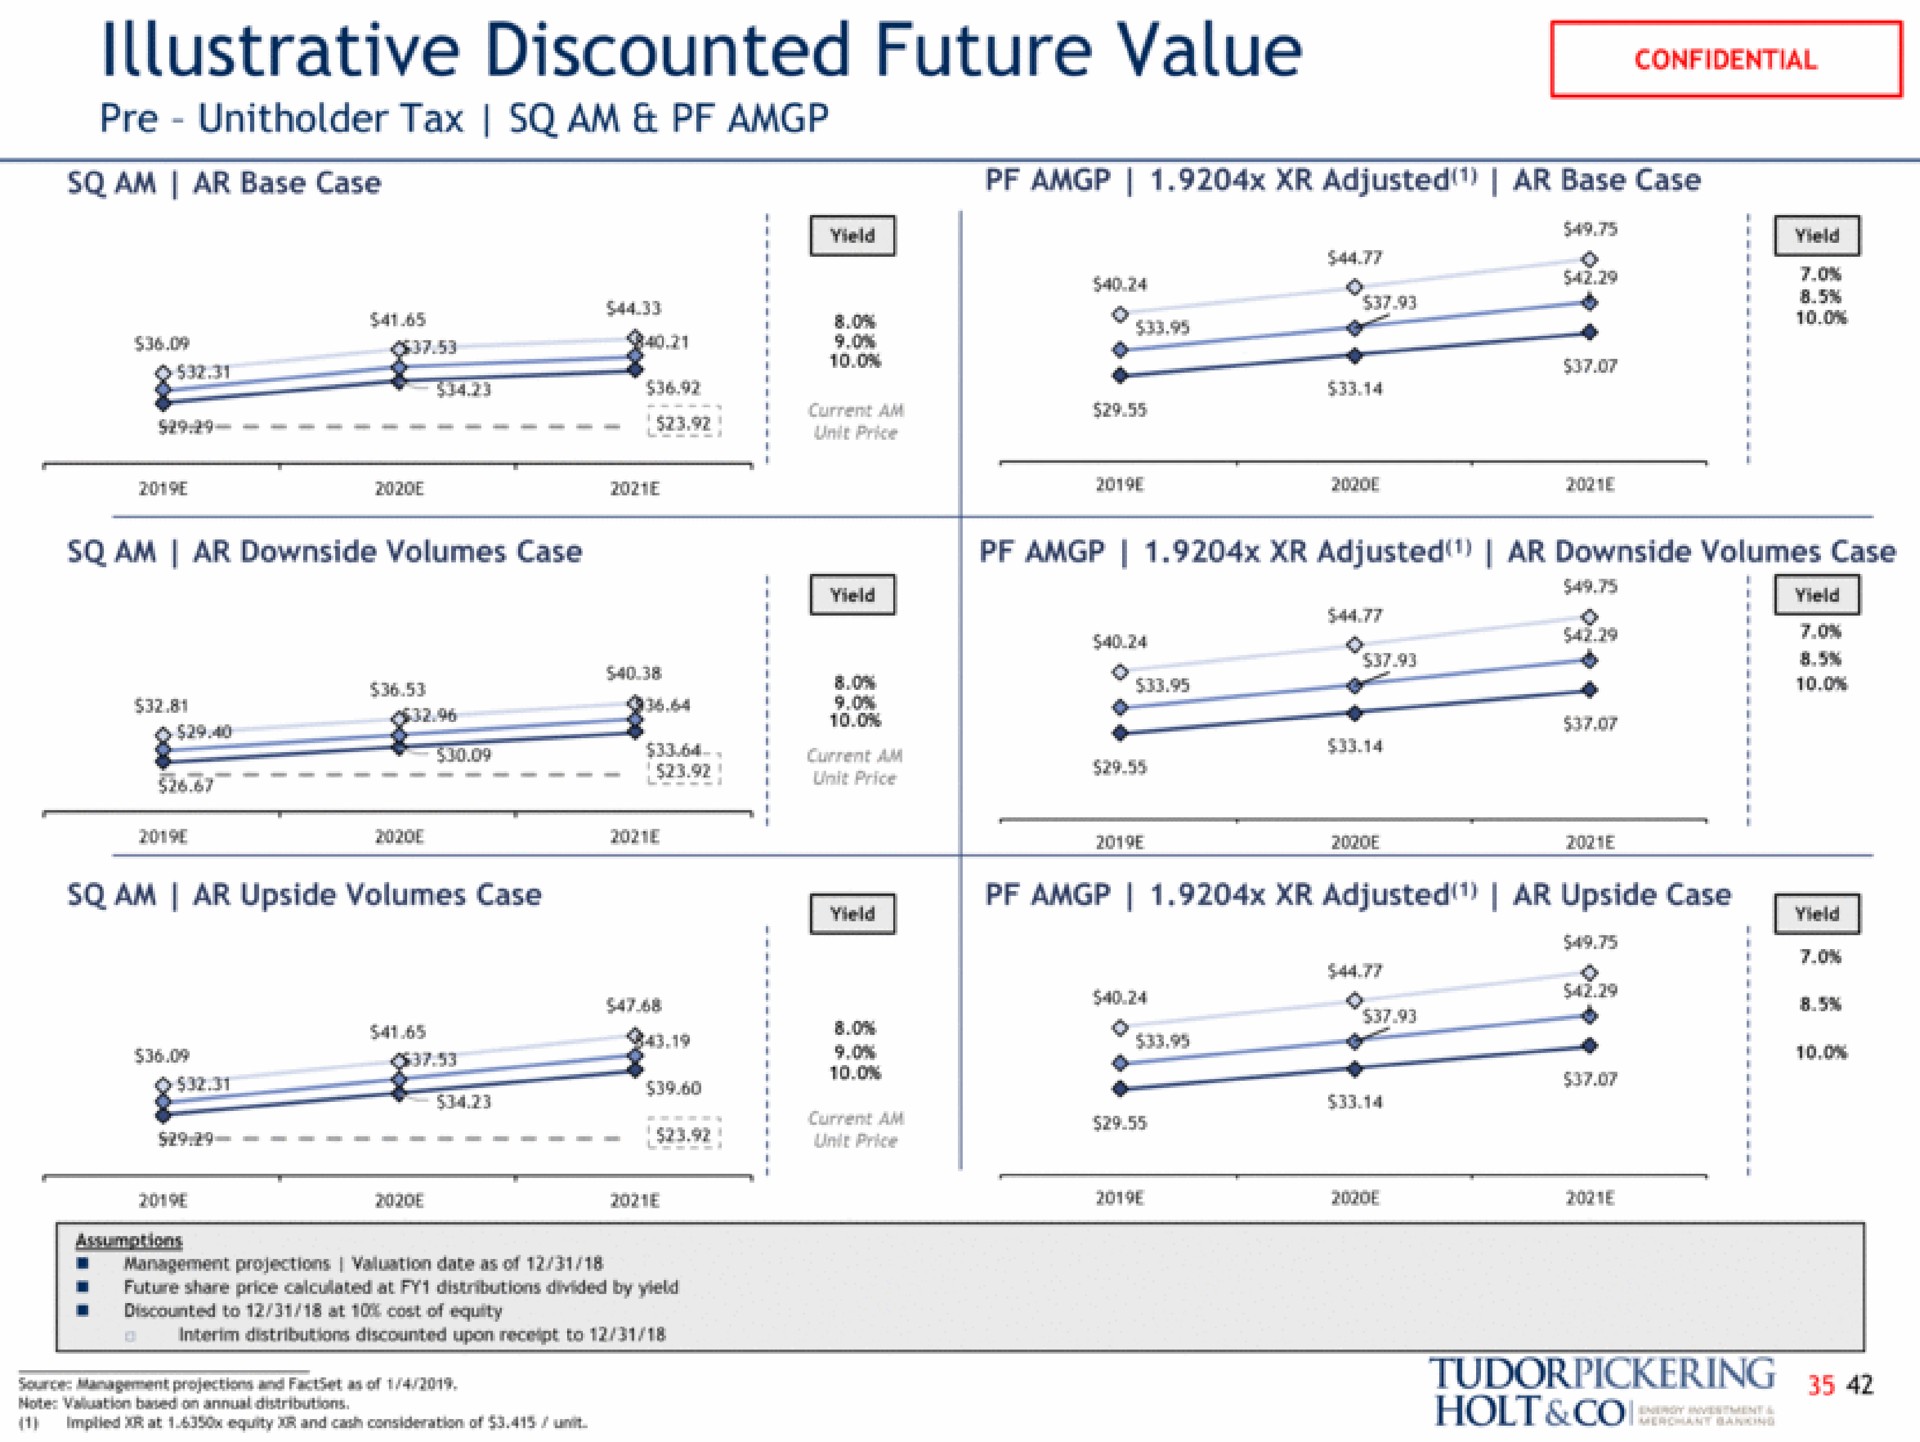 illustrative discounted future value tax am am base case adjusted base case a adjusted upside case holt management and facet on of implied mat and consideration of unit | Tudor, Pickering, Holt & Co